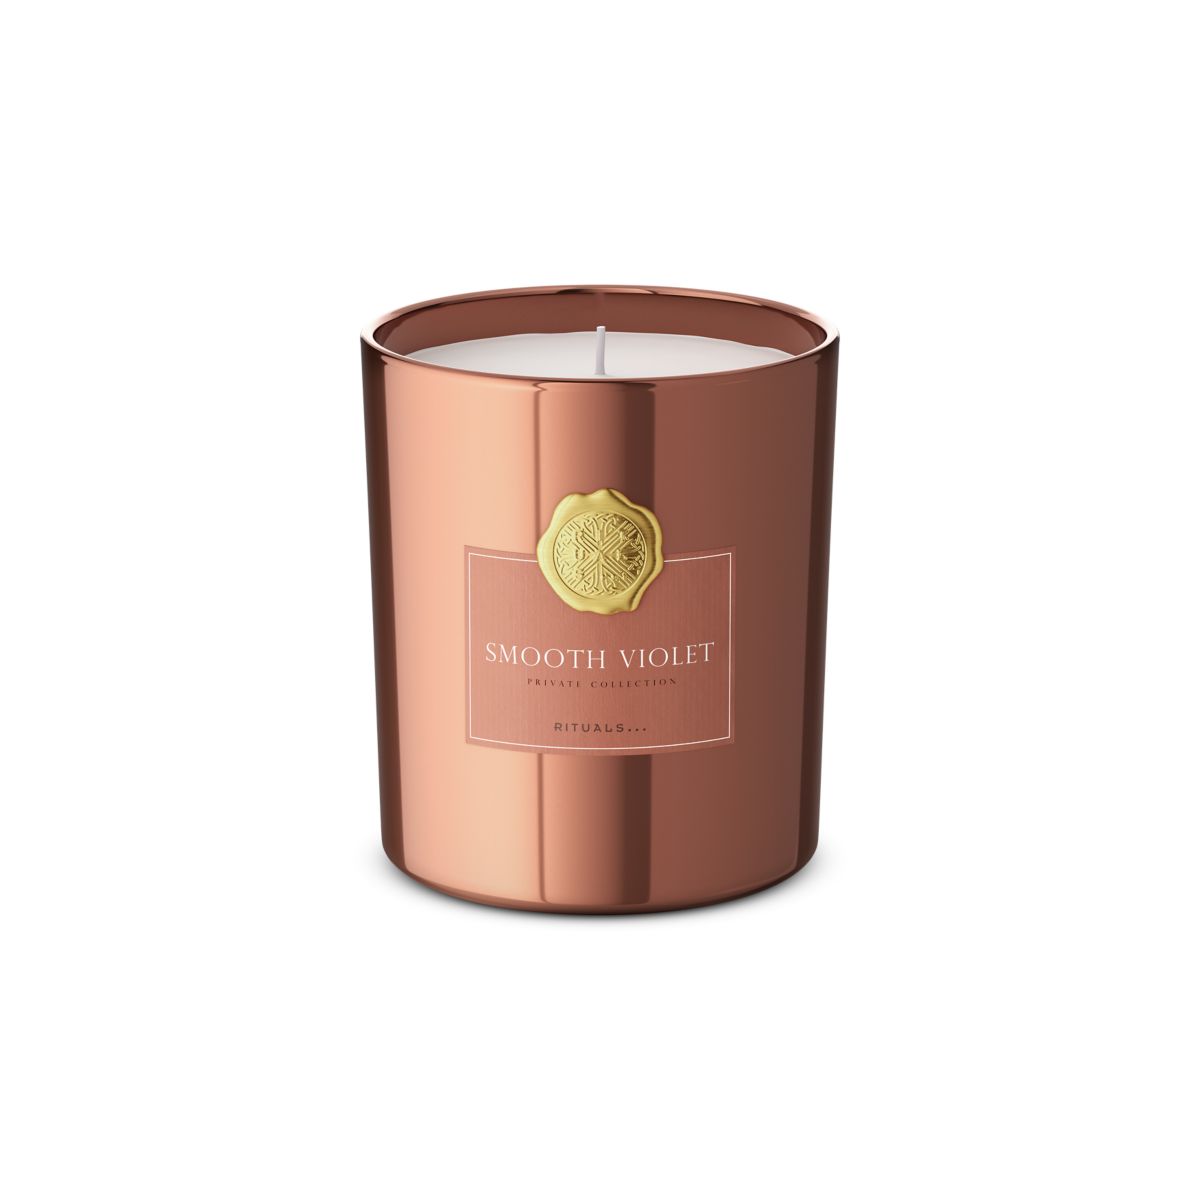 Rituals Luxury Scented Candle - Violet